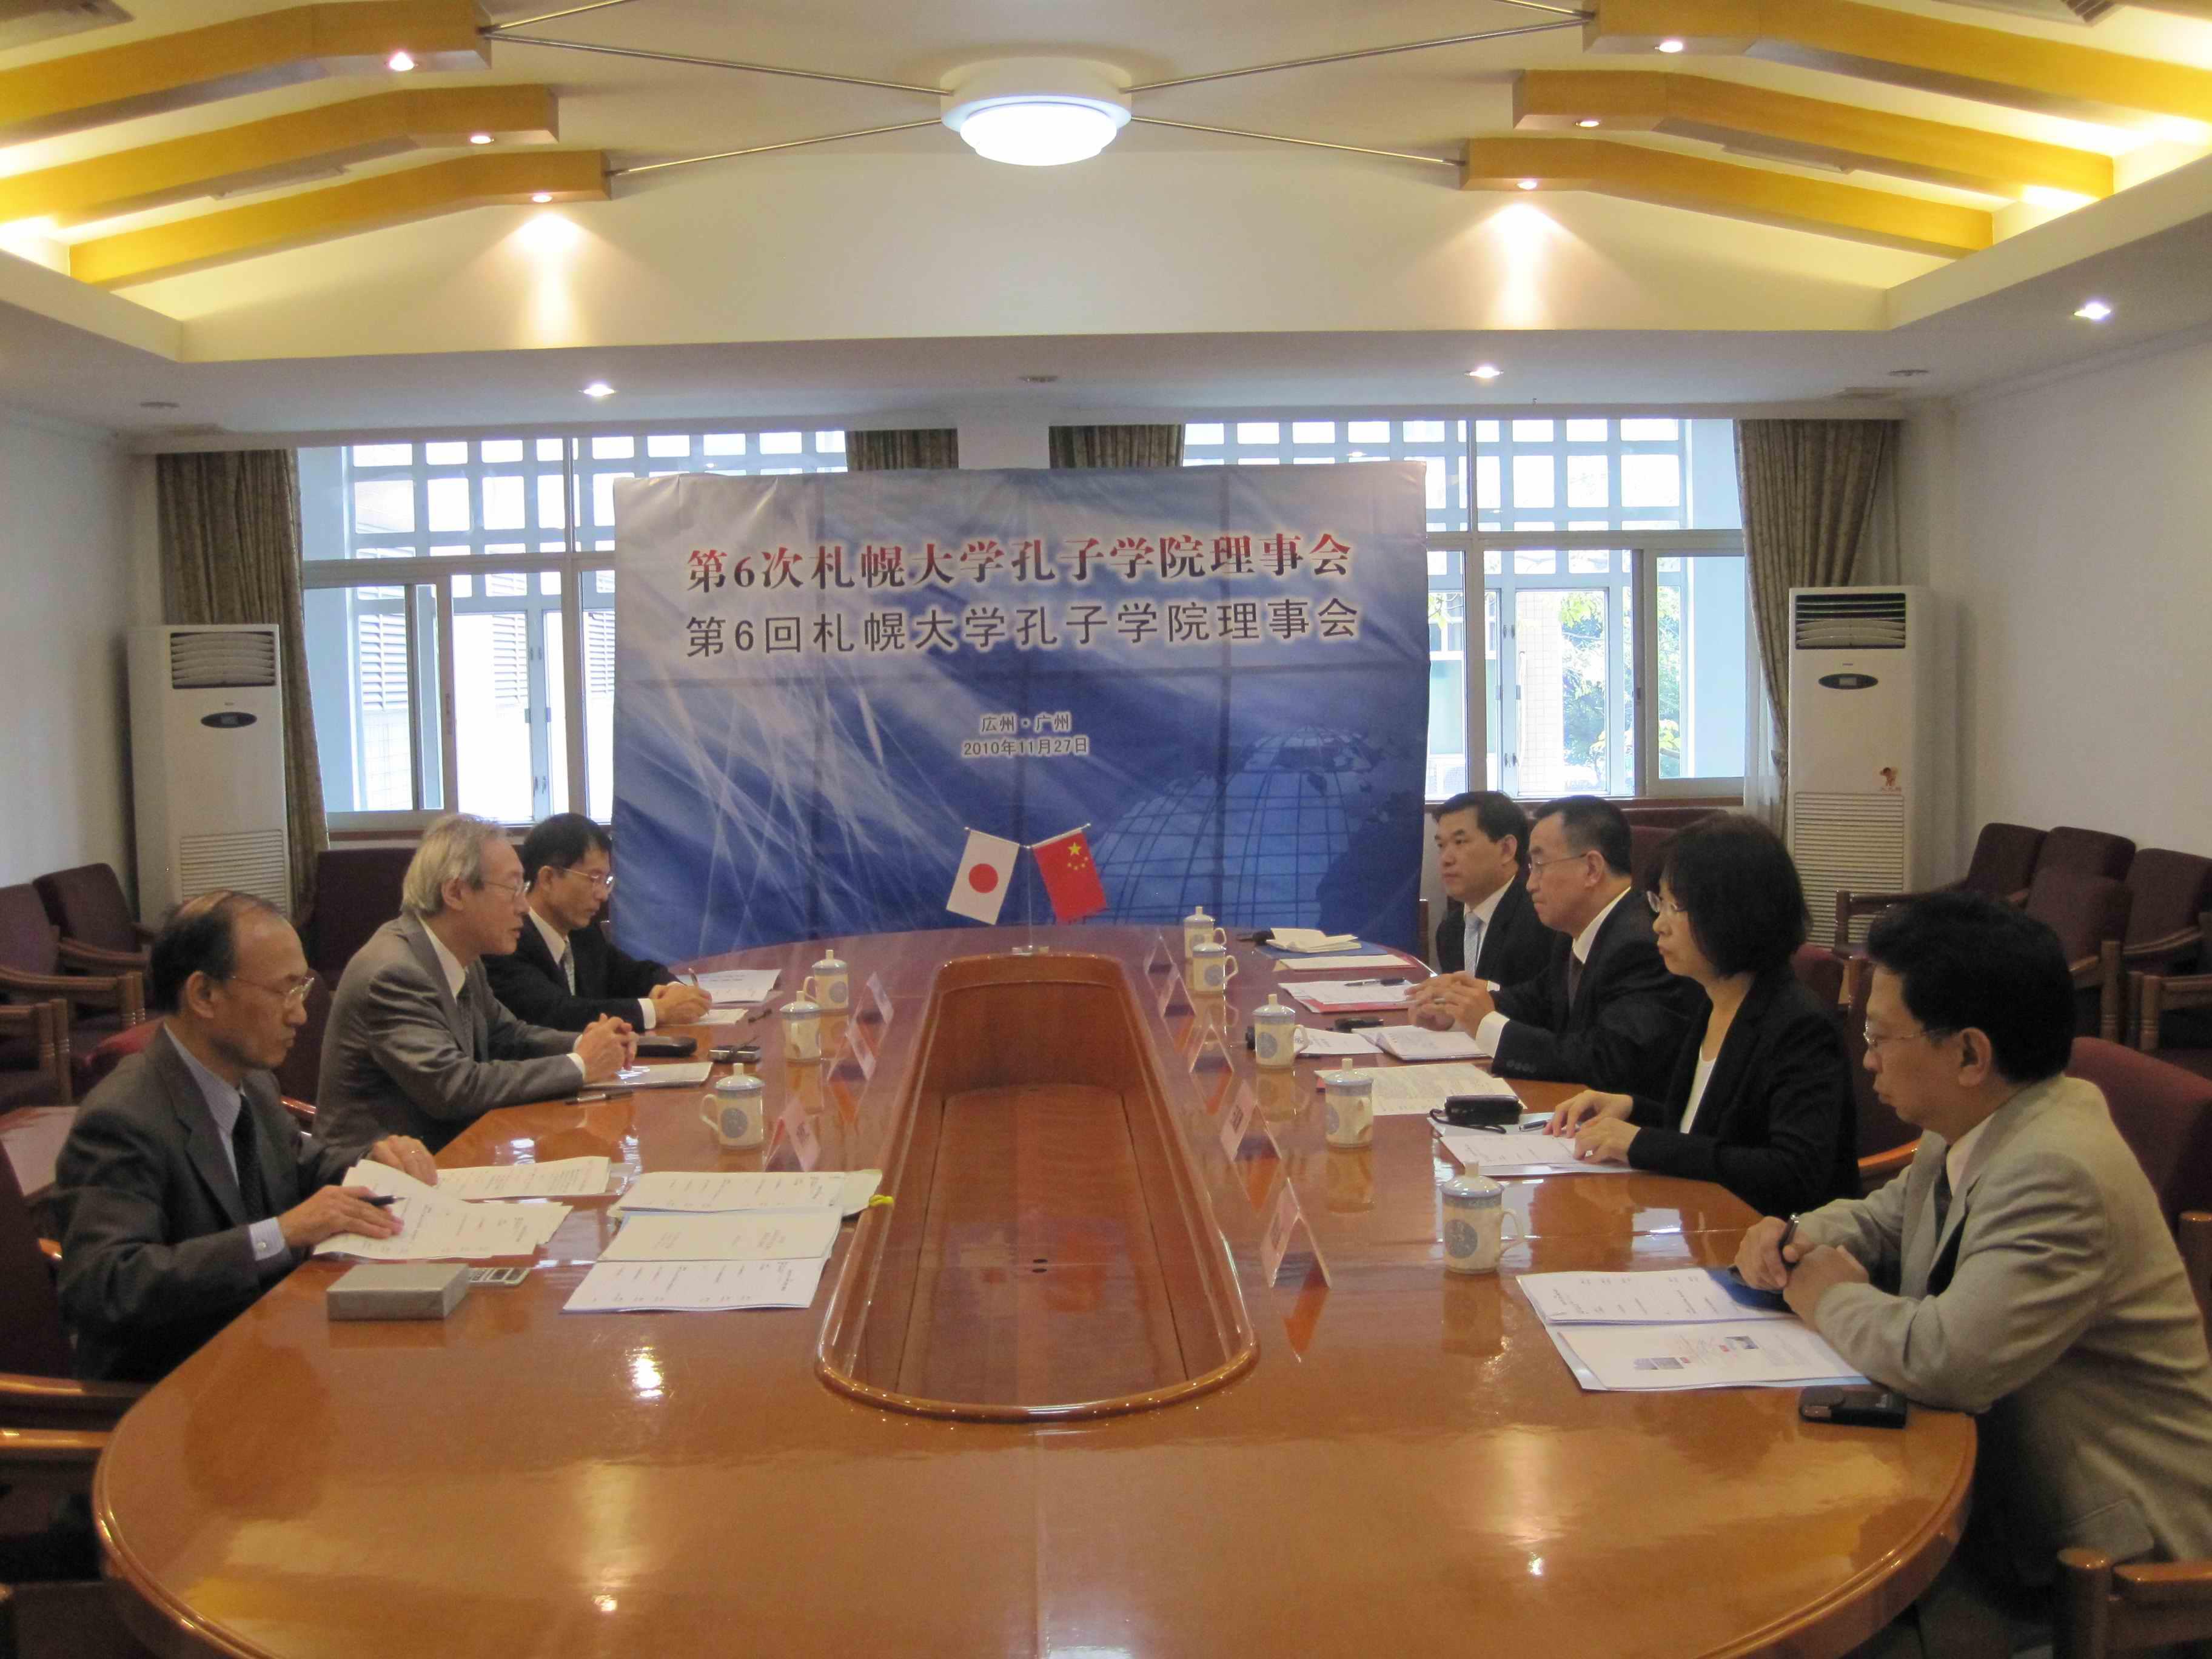 Delegation  from  the  Confucius  Institute  at  Sapporo  University  Visits  GDUFS